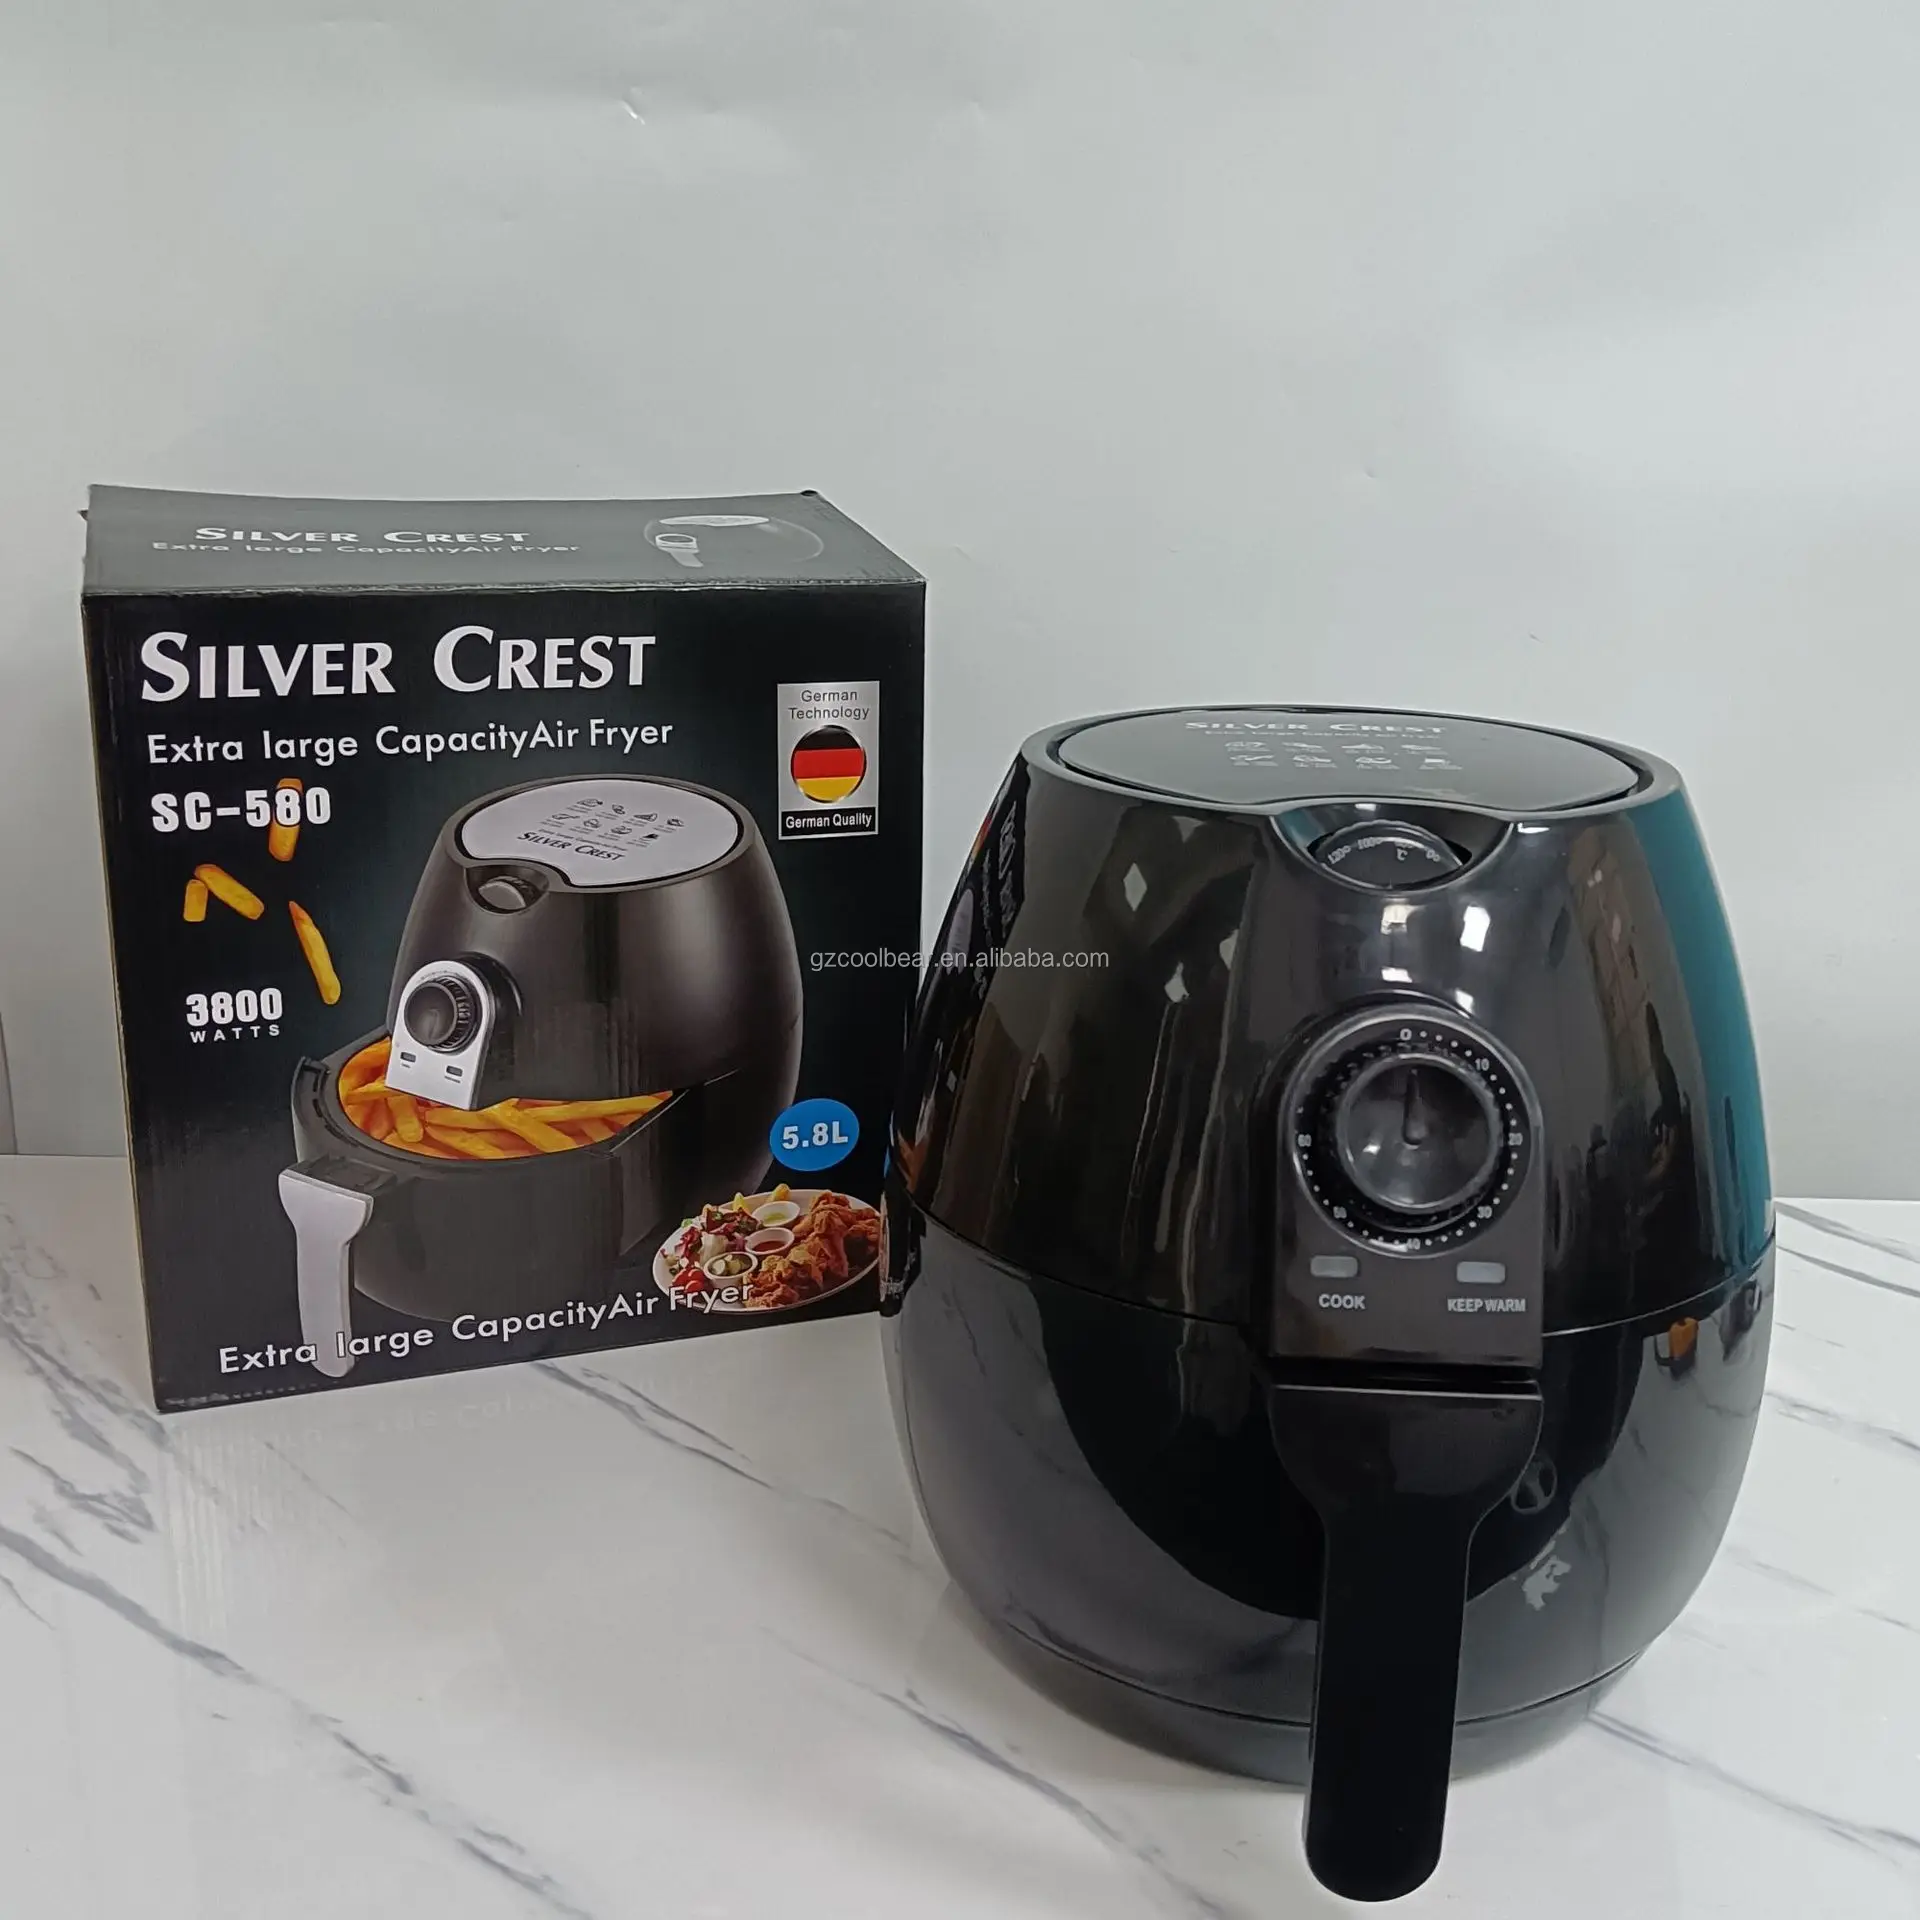 yemoat - Silver Crest Extra Large Air Fryer .